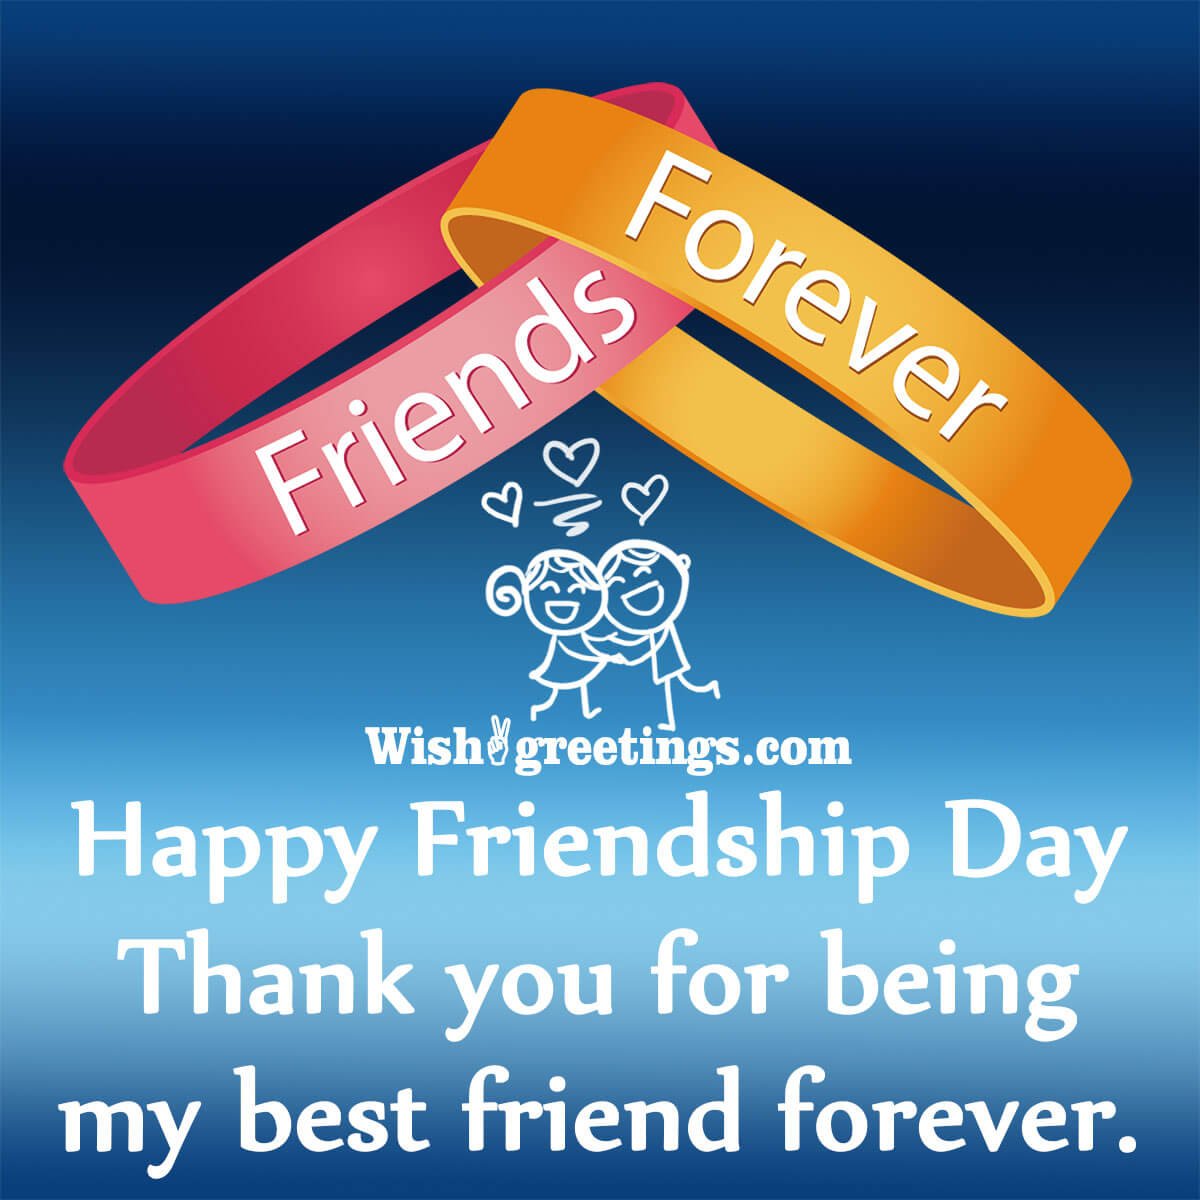 Happy Friendship Day Wishes For Best Friend - Wish Greetings